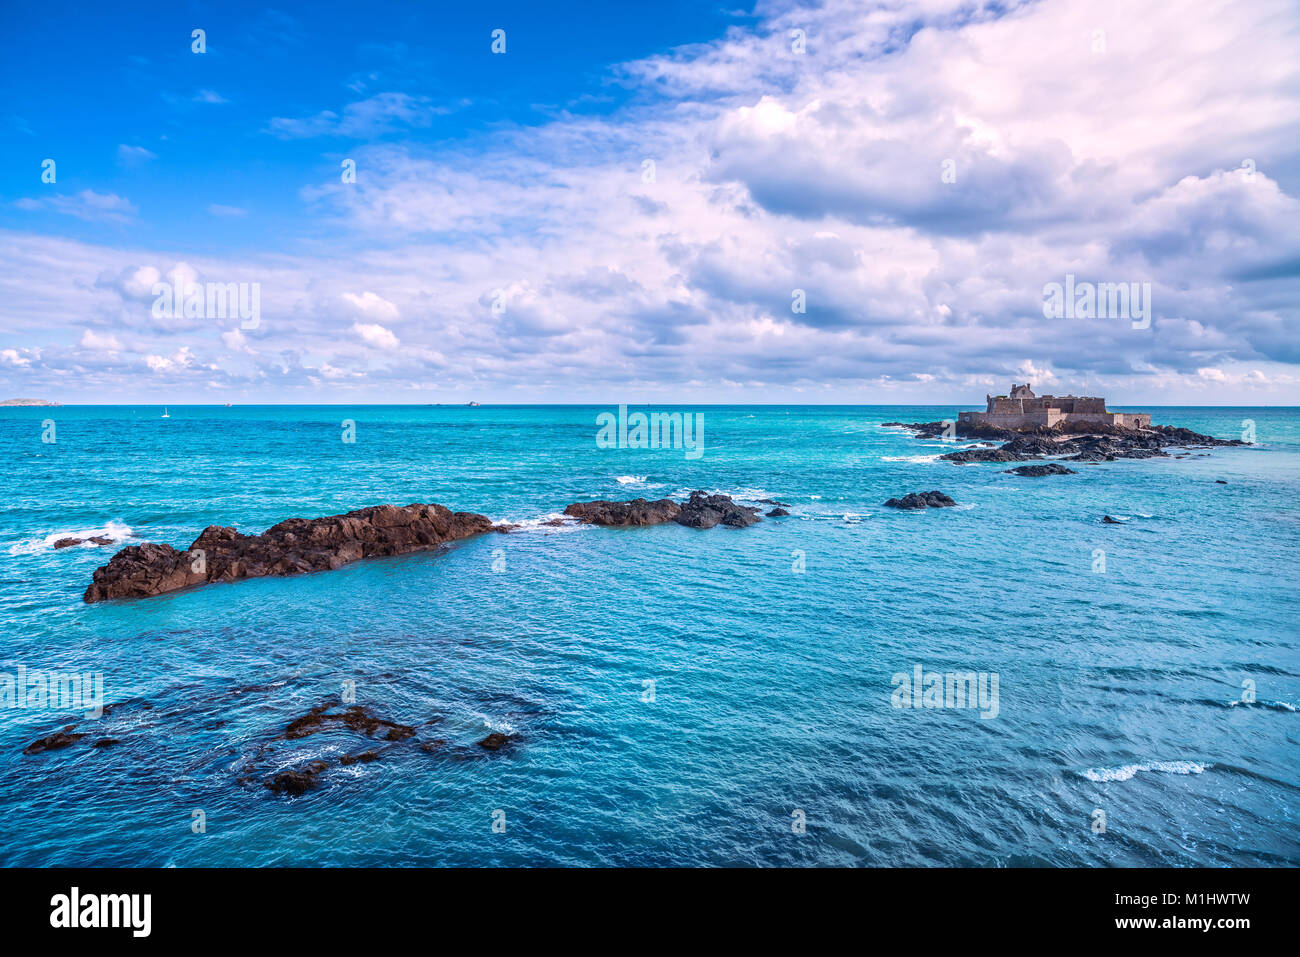 Saint Malo beach, Fort National and rocks during High Tide. Brittany, France, Europe. Stock Photo